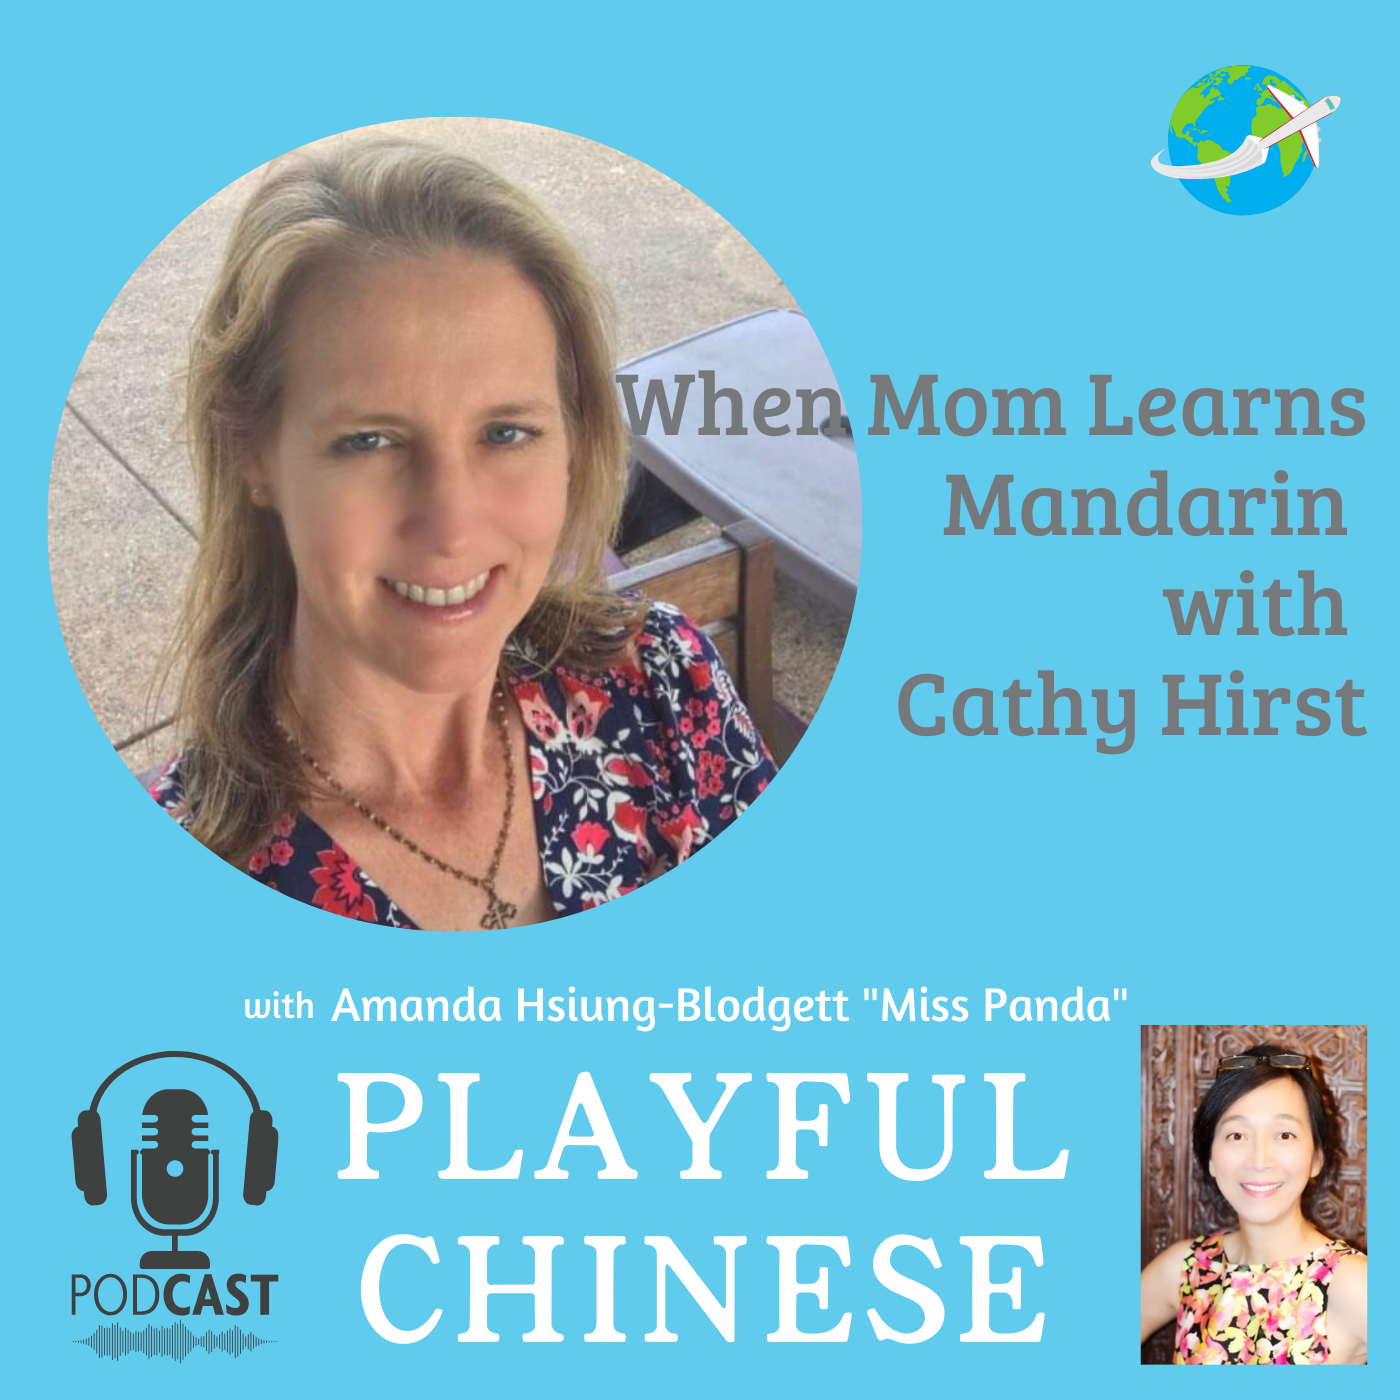 When Mom Learn Mandarin | Playful Chinese podcast | Miss Panda Chinese